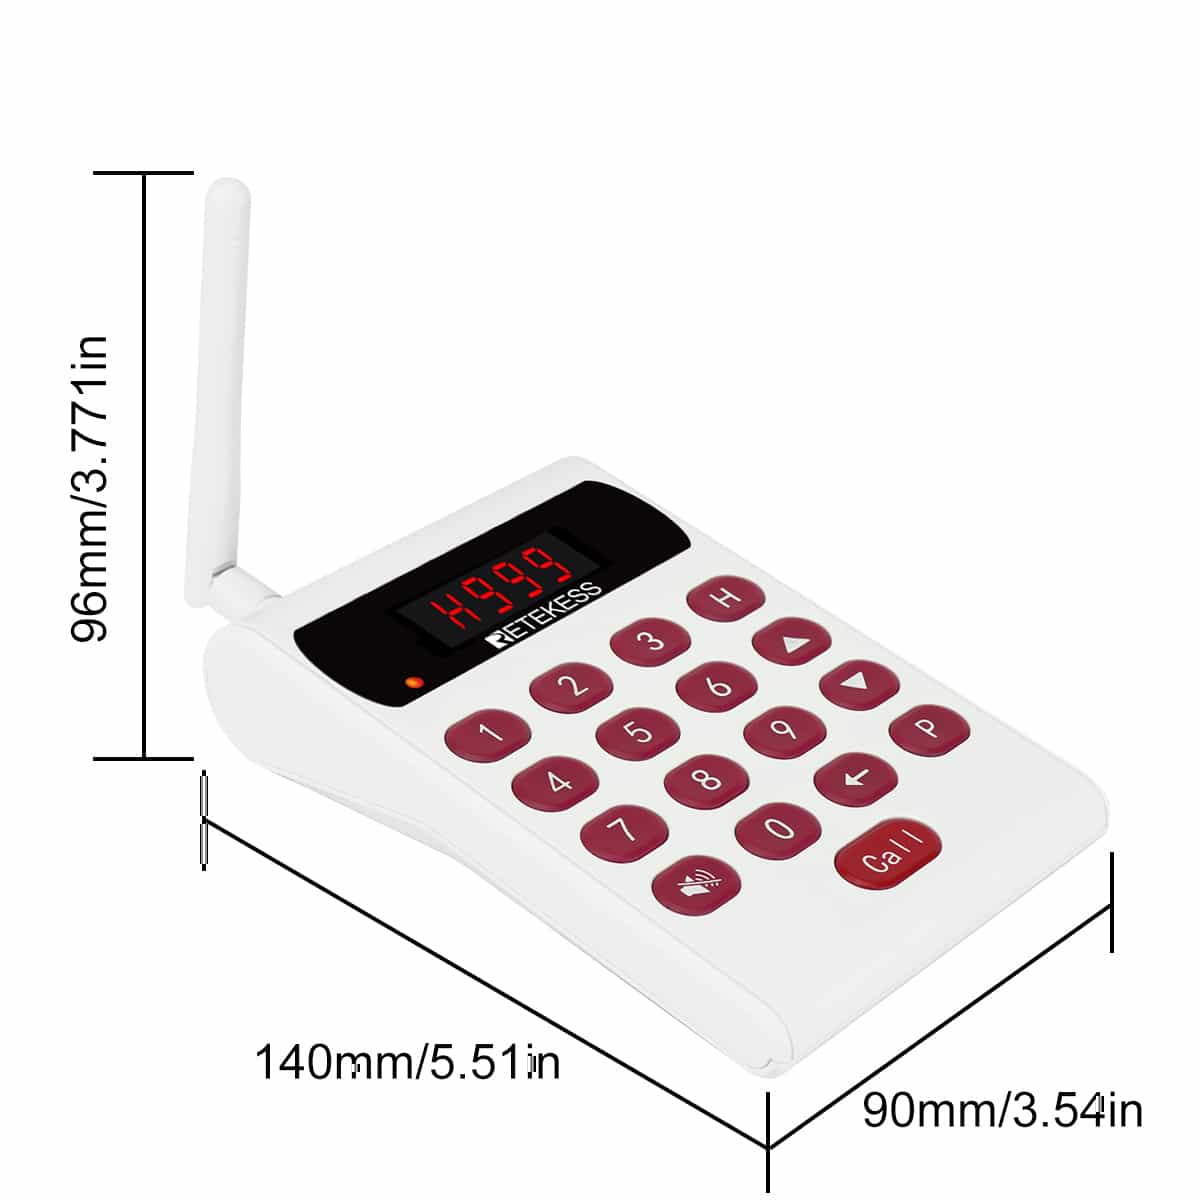 Retekess TD161 Wireless Pager System For Food Truck White Version